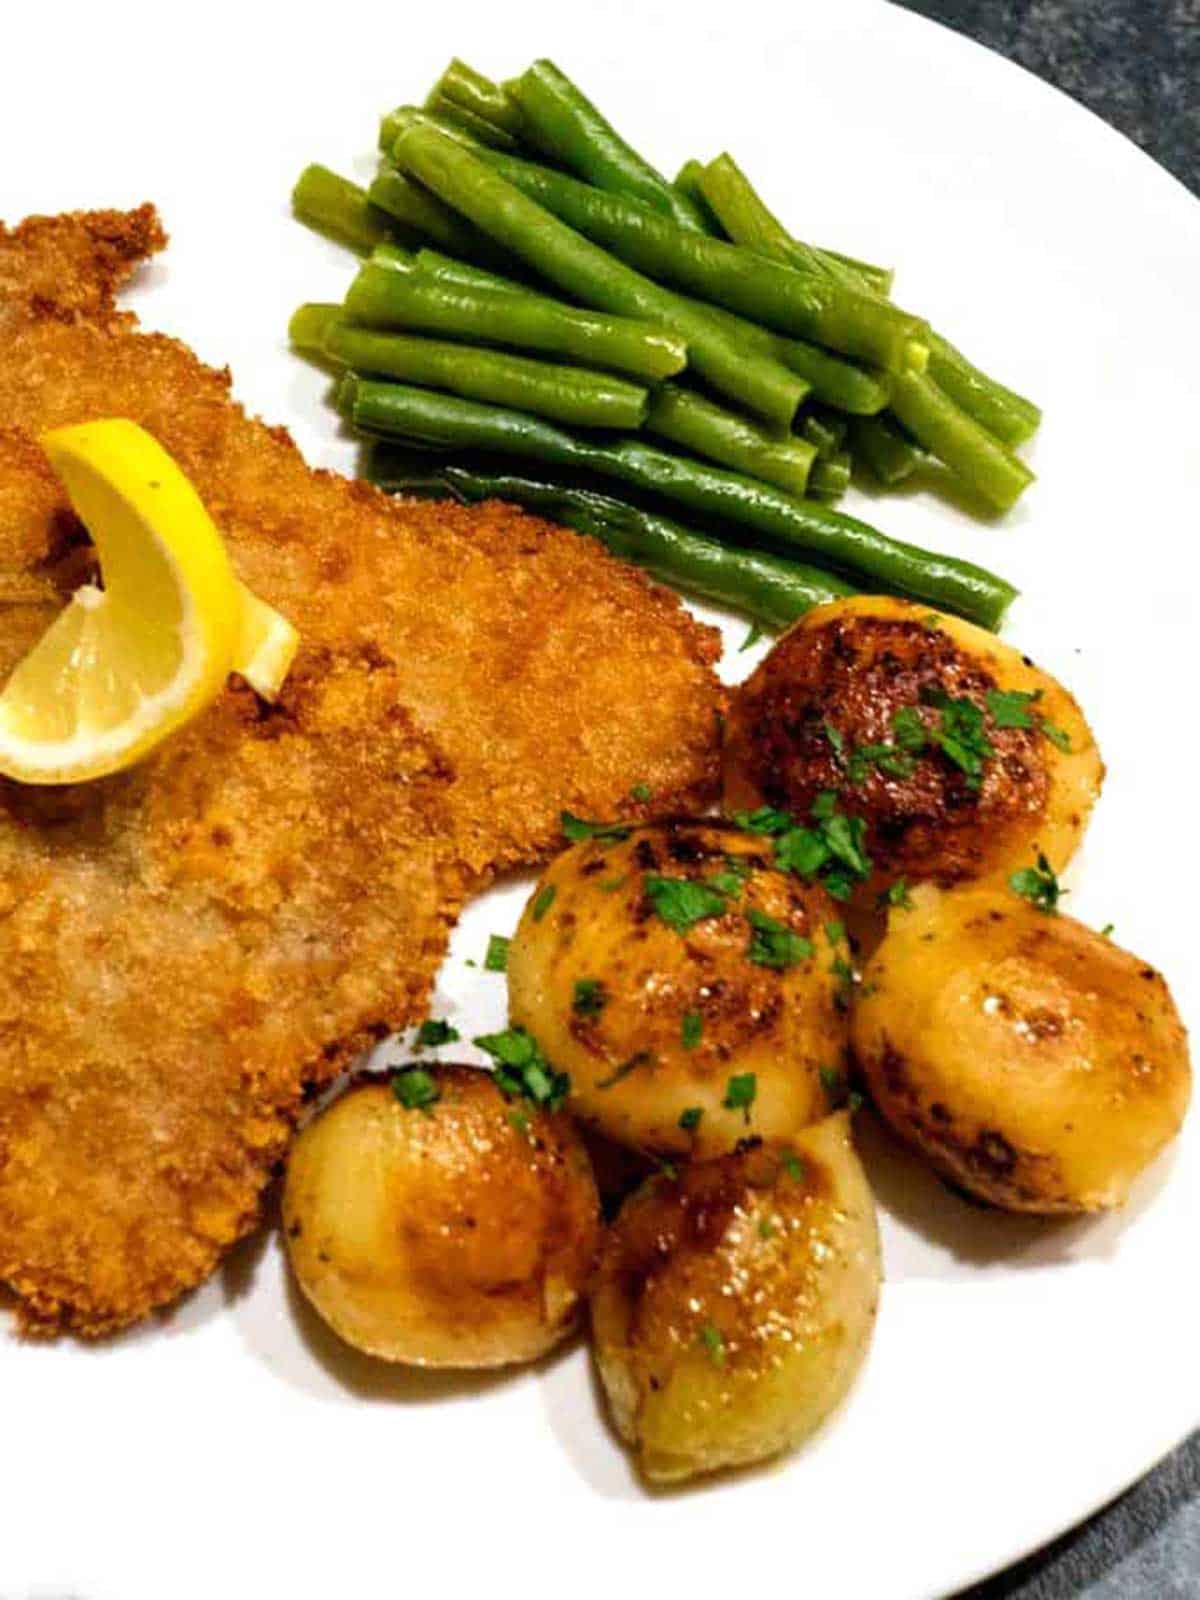 Potatoes and onions with schnitzel and green beans.